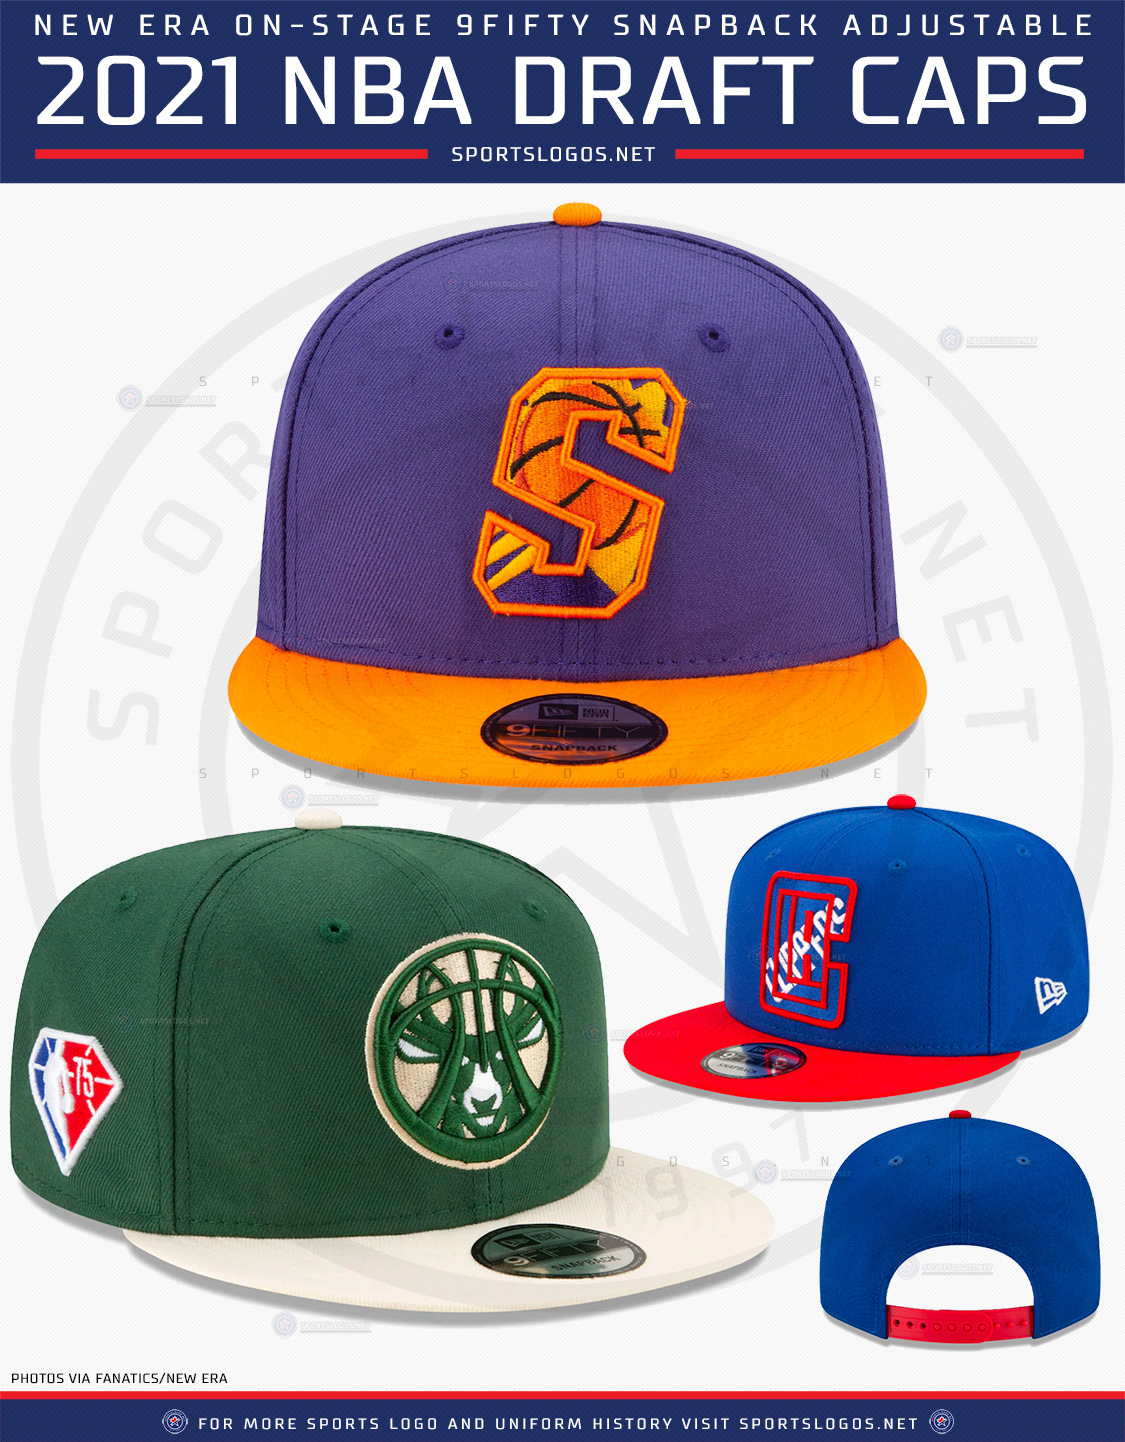 Chris Creamer  SportsLogos.Net on X: New Era's 2021 NBA Draft caps are  available for purchase right now via our affiliate link, I thank you for  your support! Shop here:   /